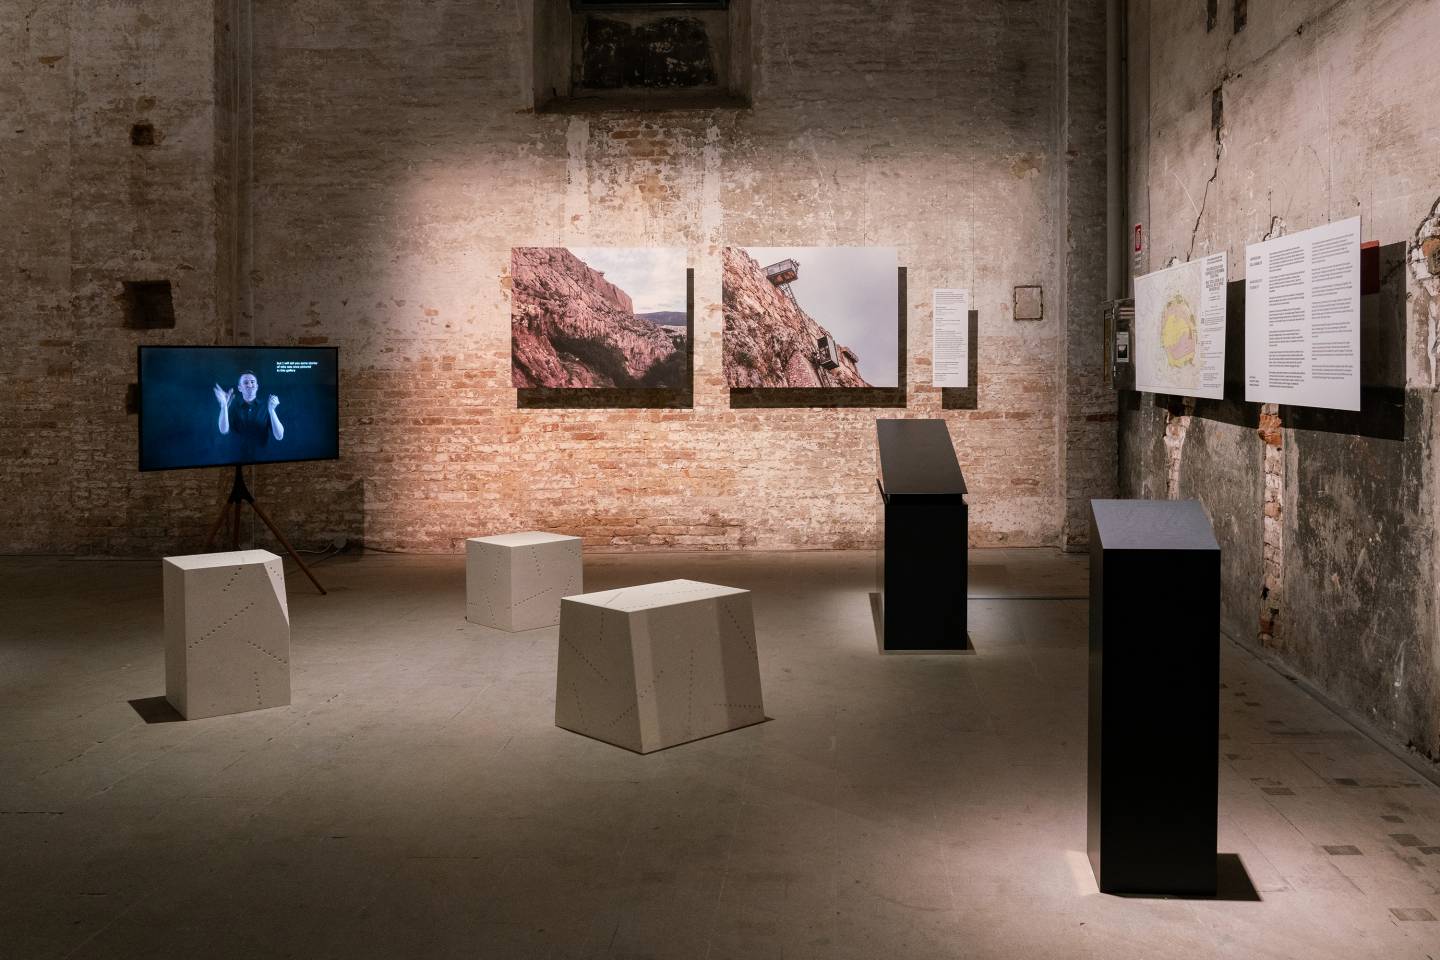 Archaeology of Disability exhibition includes carved stone stools and a television screen